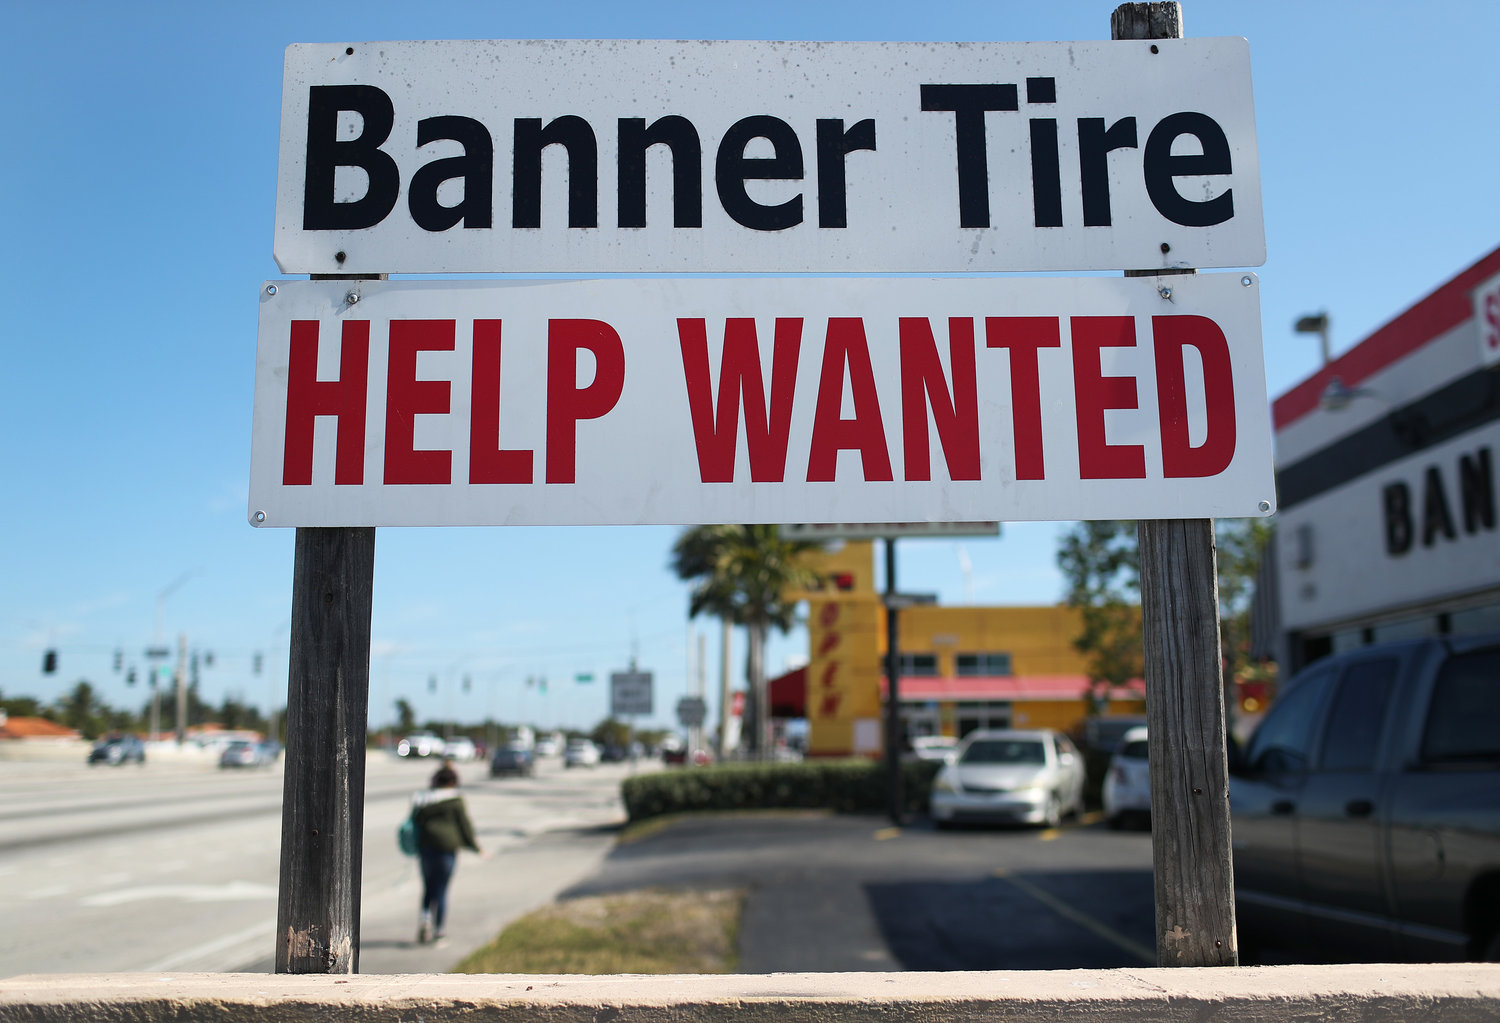 A "Help Wanted" sign is posted in front of a business on February 4, 2021 in Miami. (Joe Raedle/Getty Images/TNS)